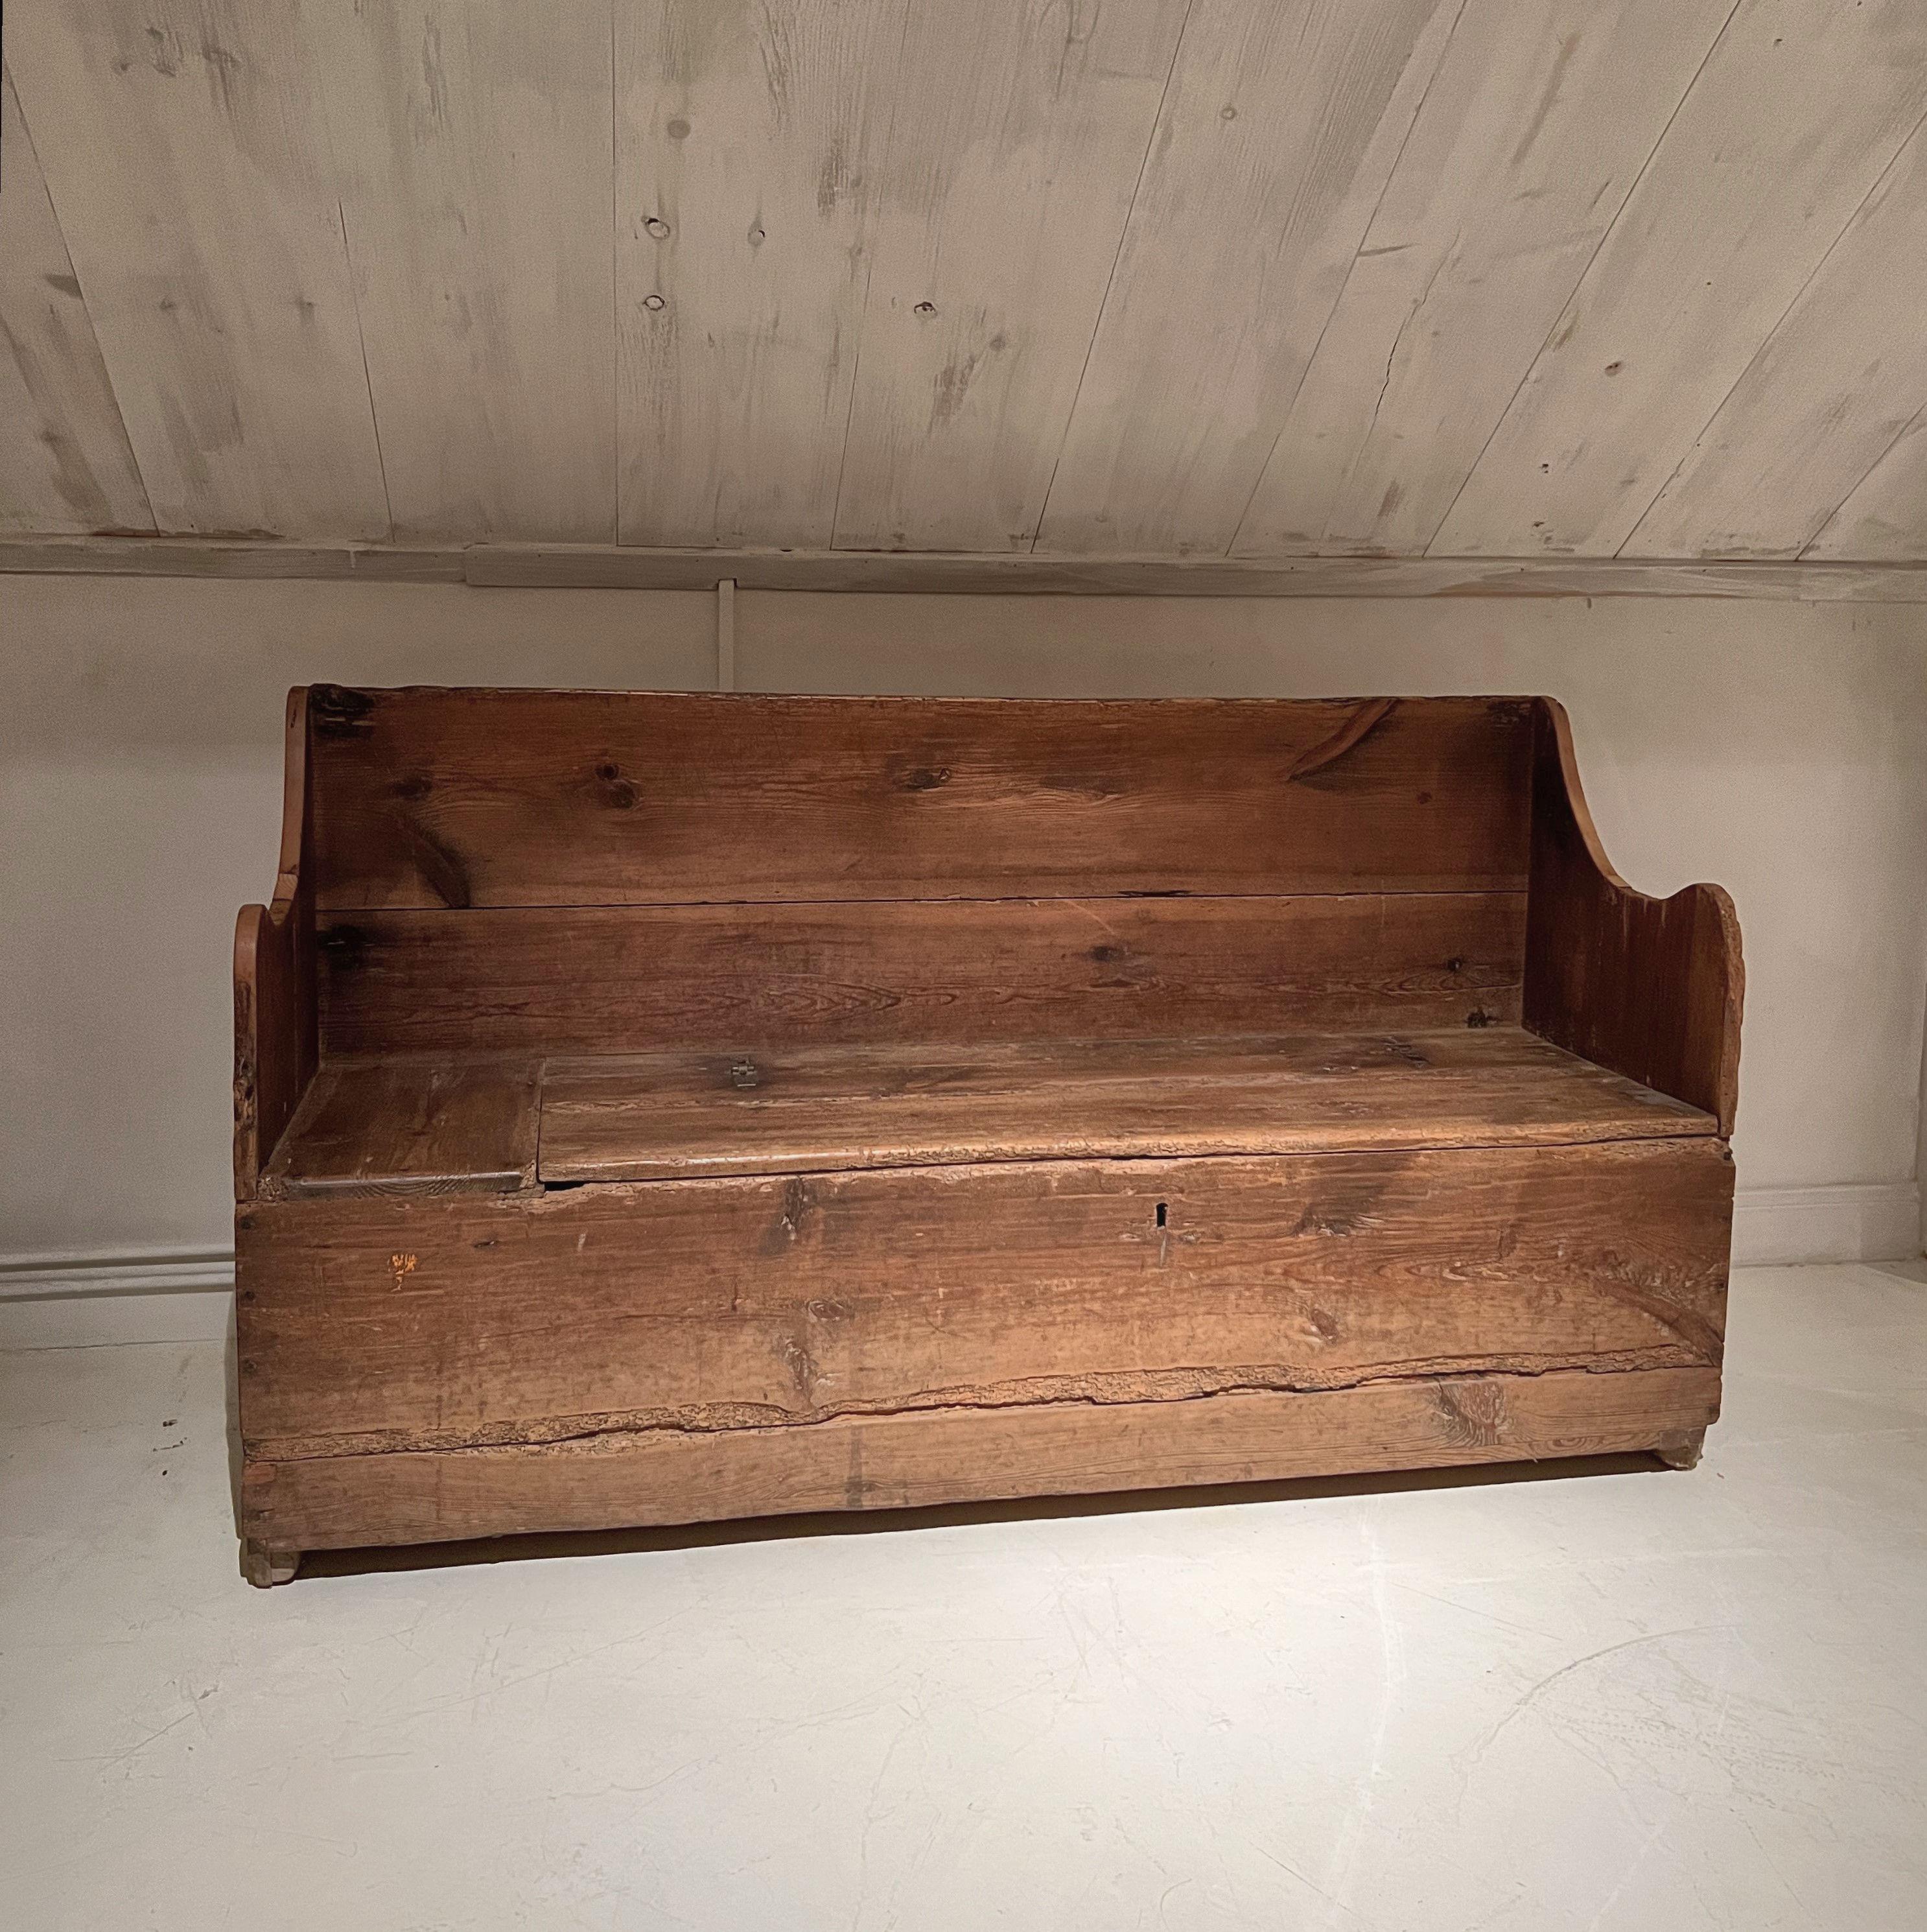 A great example of a Pyrinee mountain Bench. Beautiful grain, color and patina. Sturdy and ready for everyday use with modest dimensions. Rare features include a offering box which can only be accessed when the seat is opened. Furthermore it is